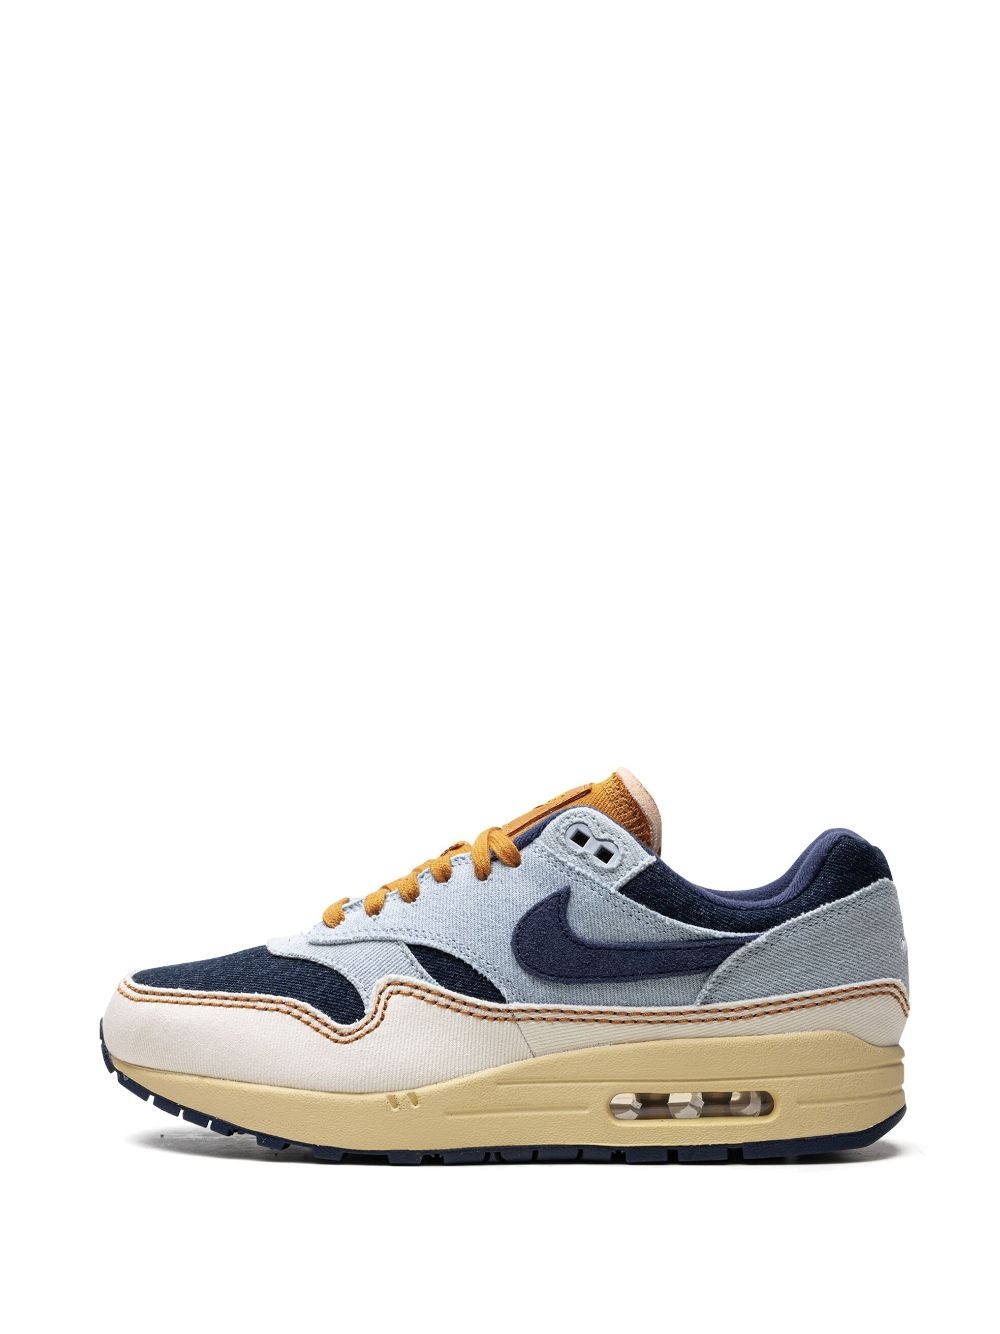 Air Max 1 '87 "Aura/Midnight Navy/Pale Ivory" sneakers - 5